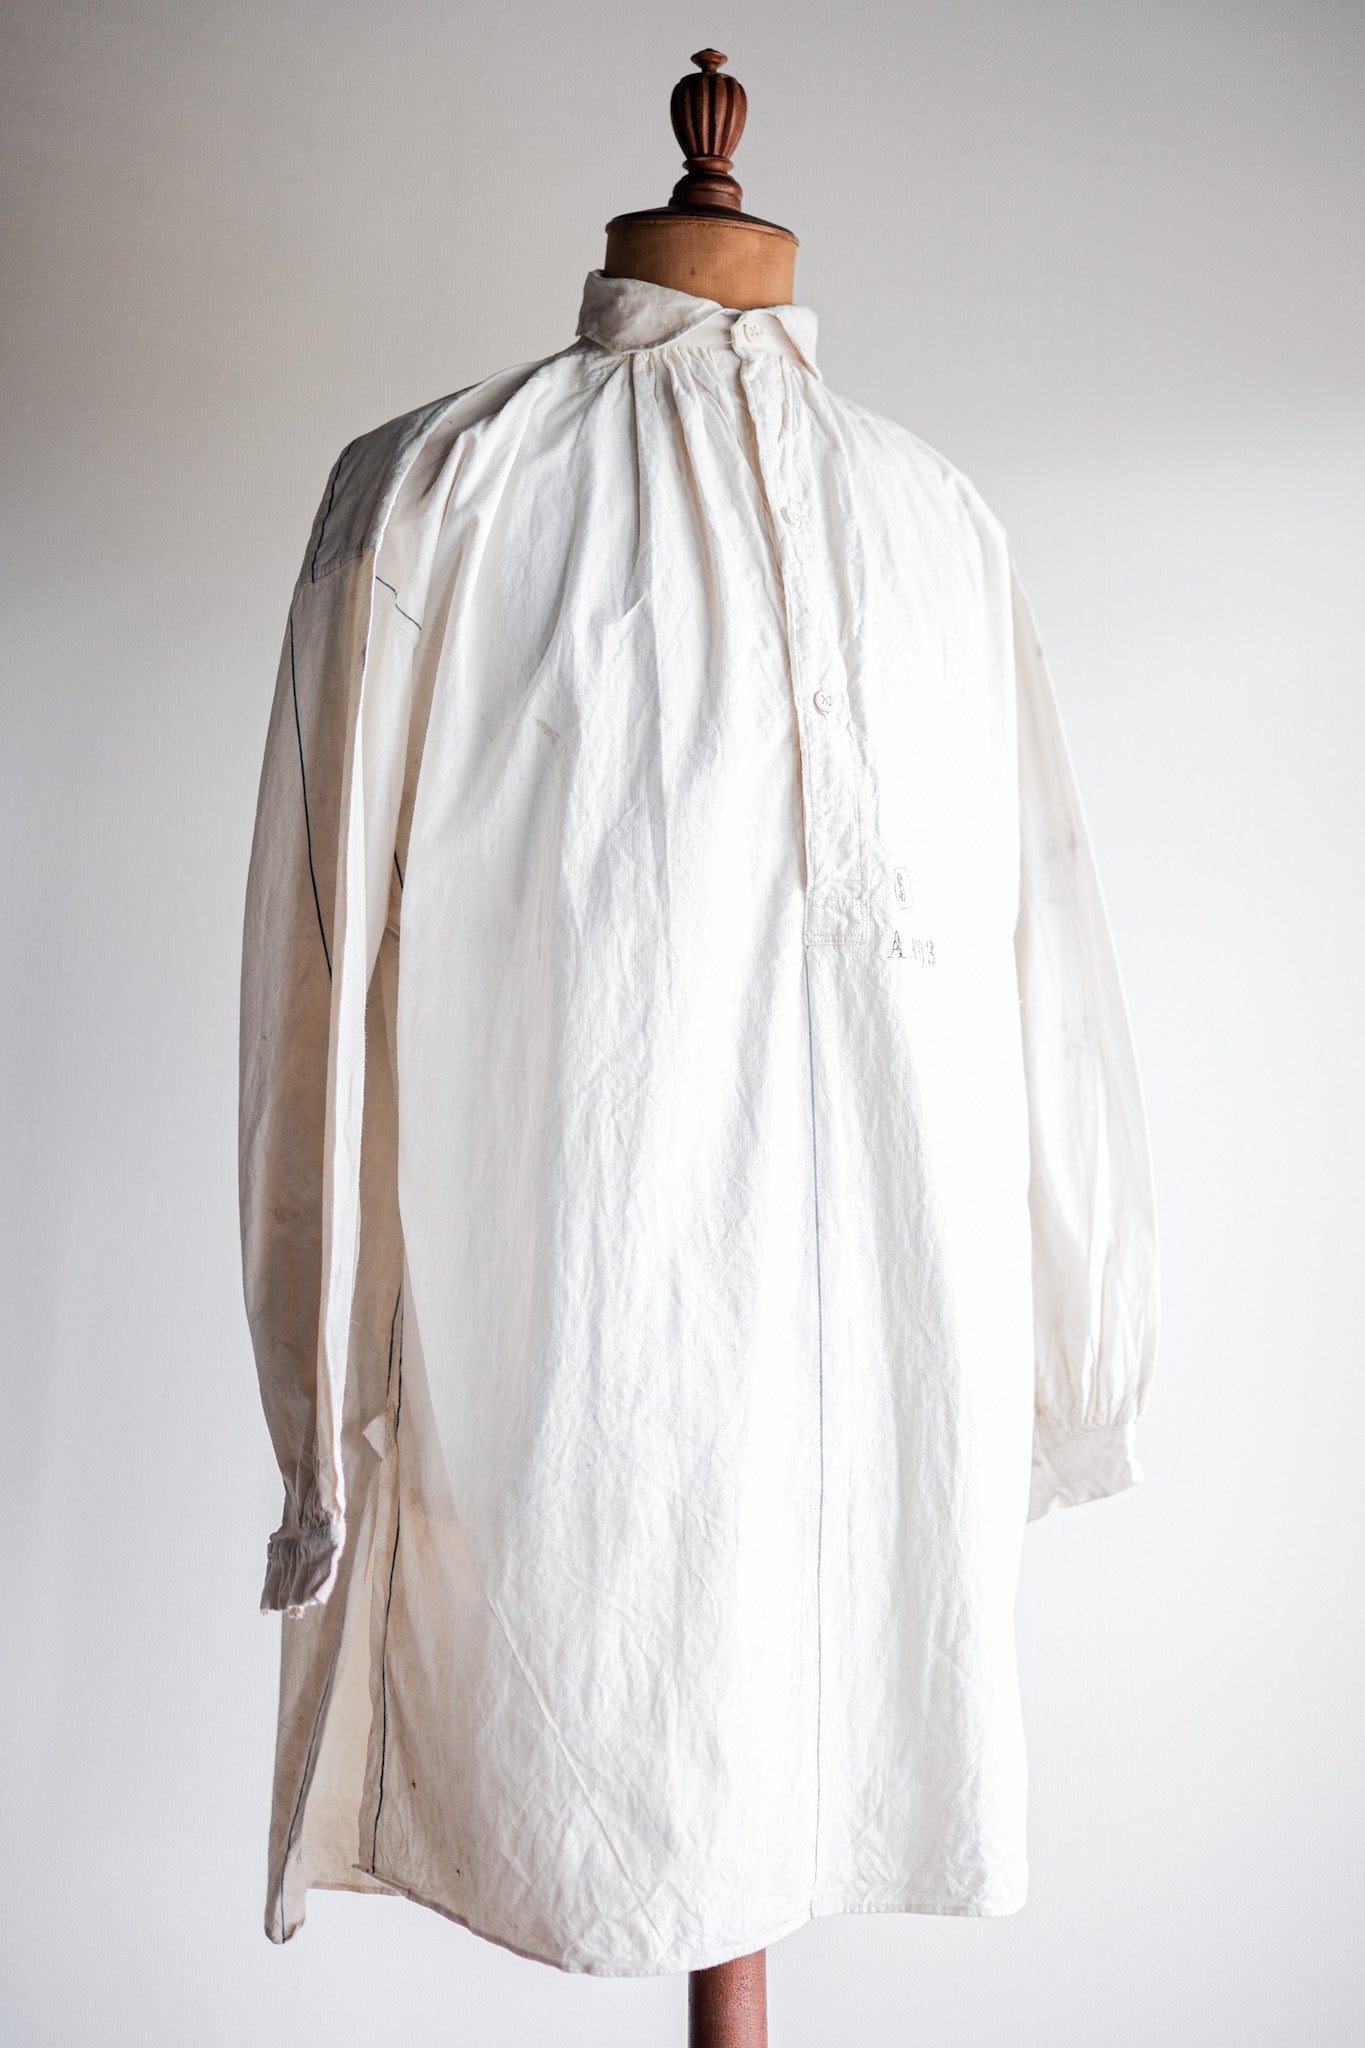 【Late 19th C】French Army of Africa Cotton Linen Coronial Shirt "Dead Stock"